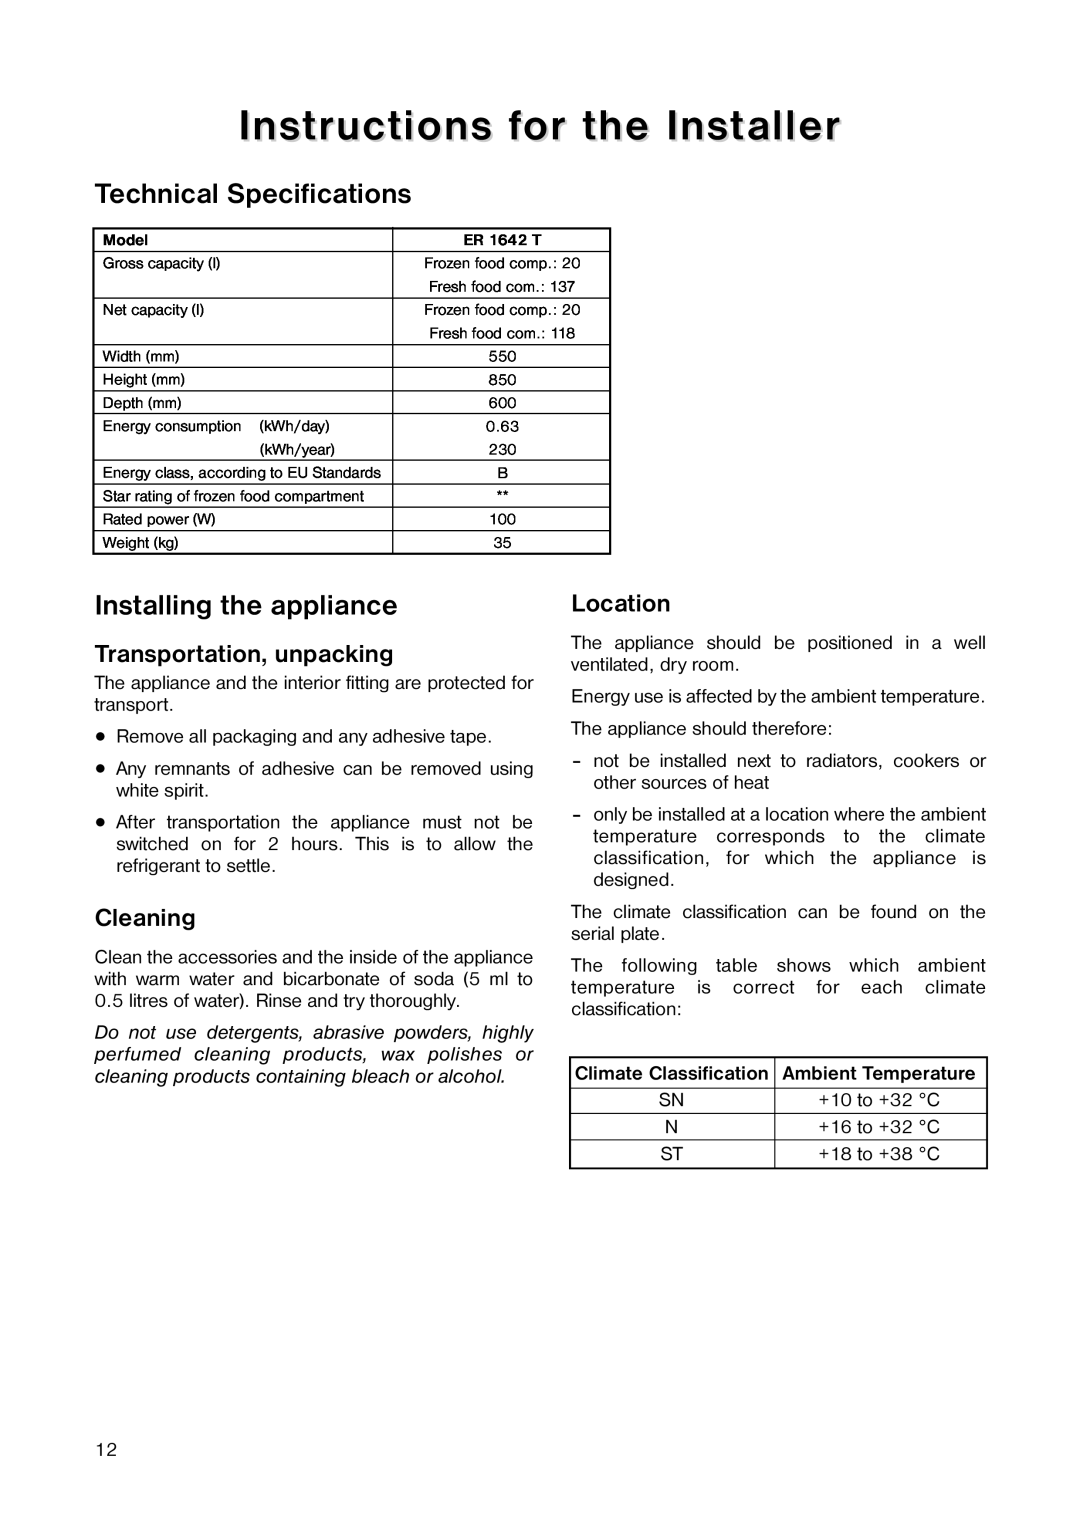 Kelvinator ER 1642 T manual Instructions for the Installer, Technical Specifications, Installing the appliance, Cleaning 